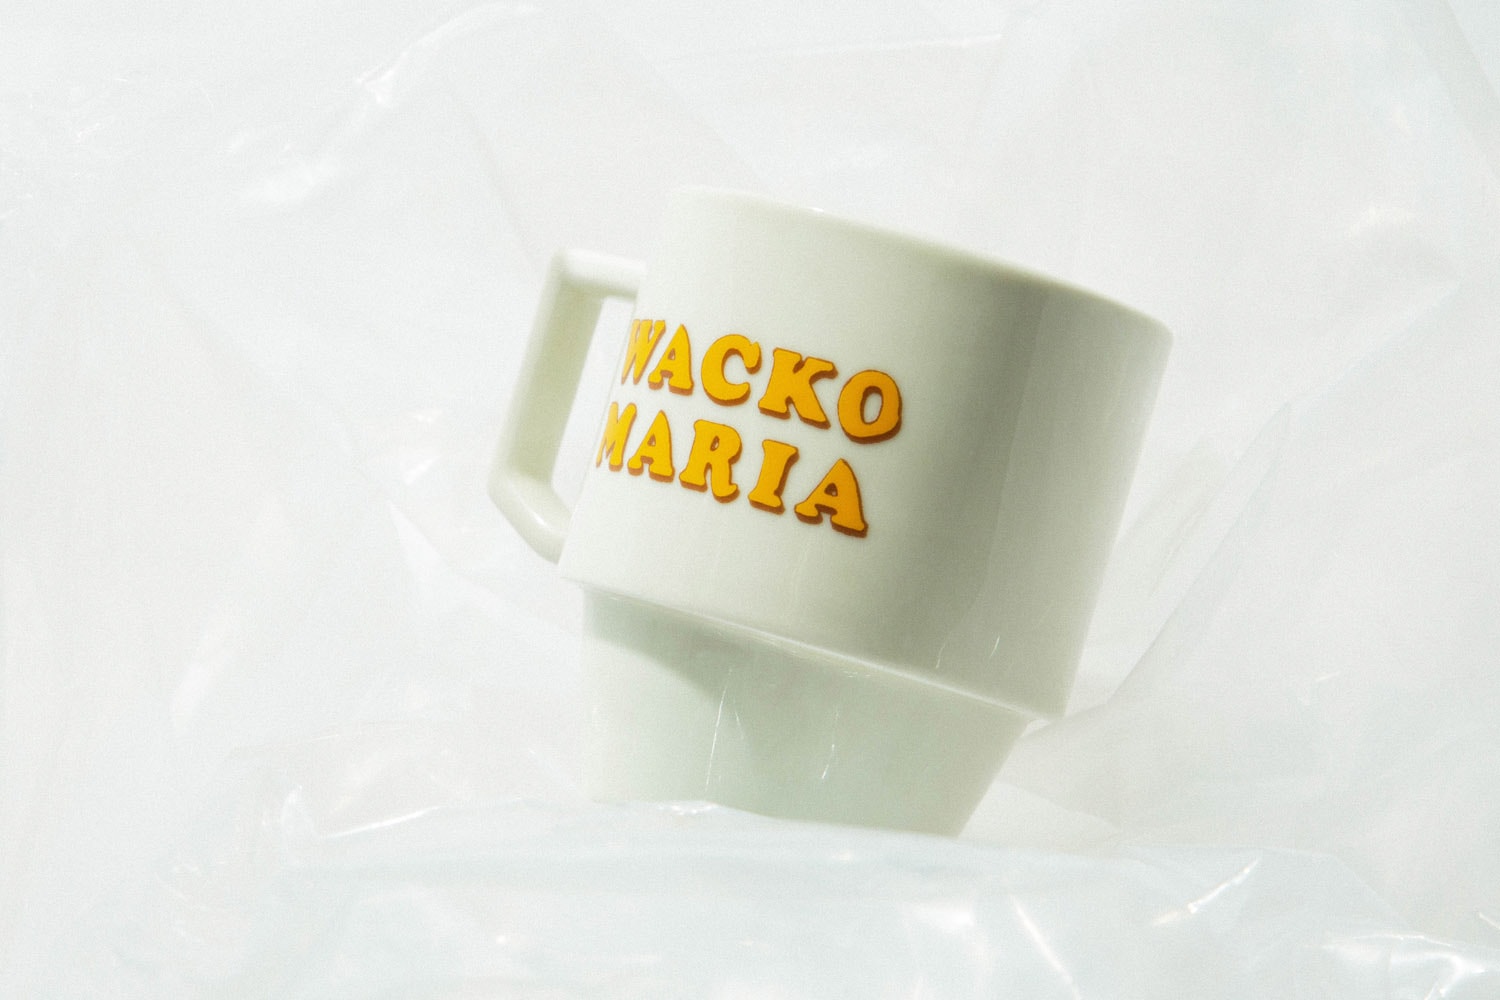 Wacko Maria Spring/Summer 2018 Collection HBX Delivery T-shirt Hoodie Cup Rug Graphics Japanese Streetwear Fashion Release Details